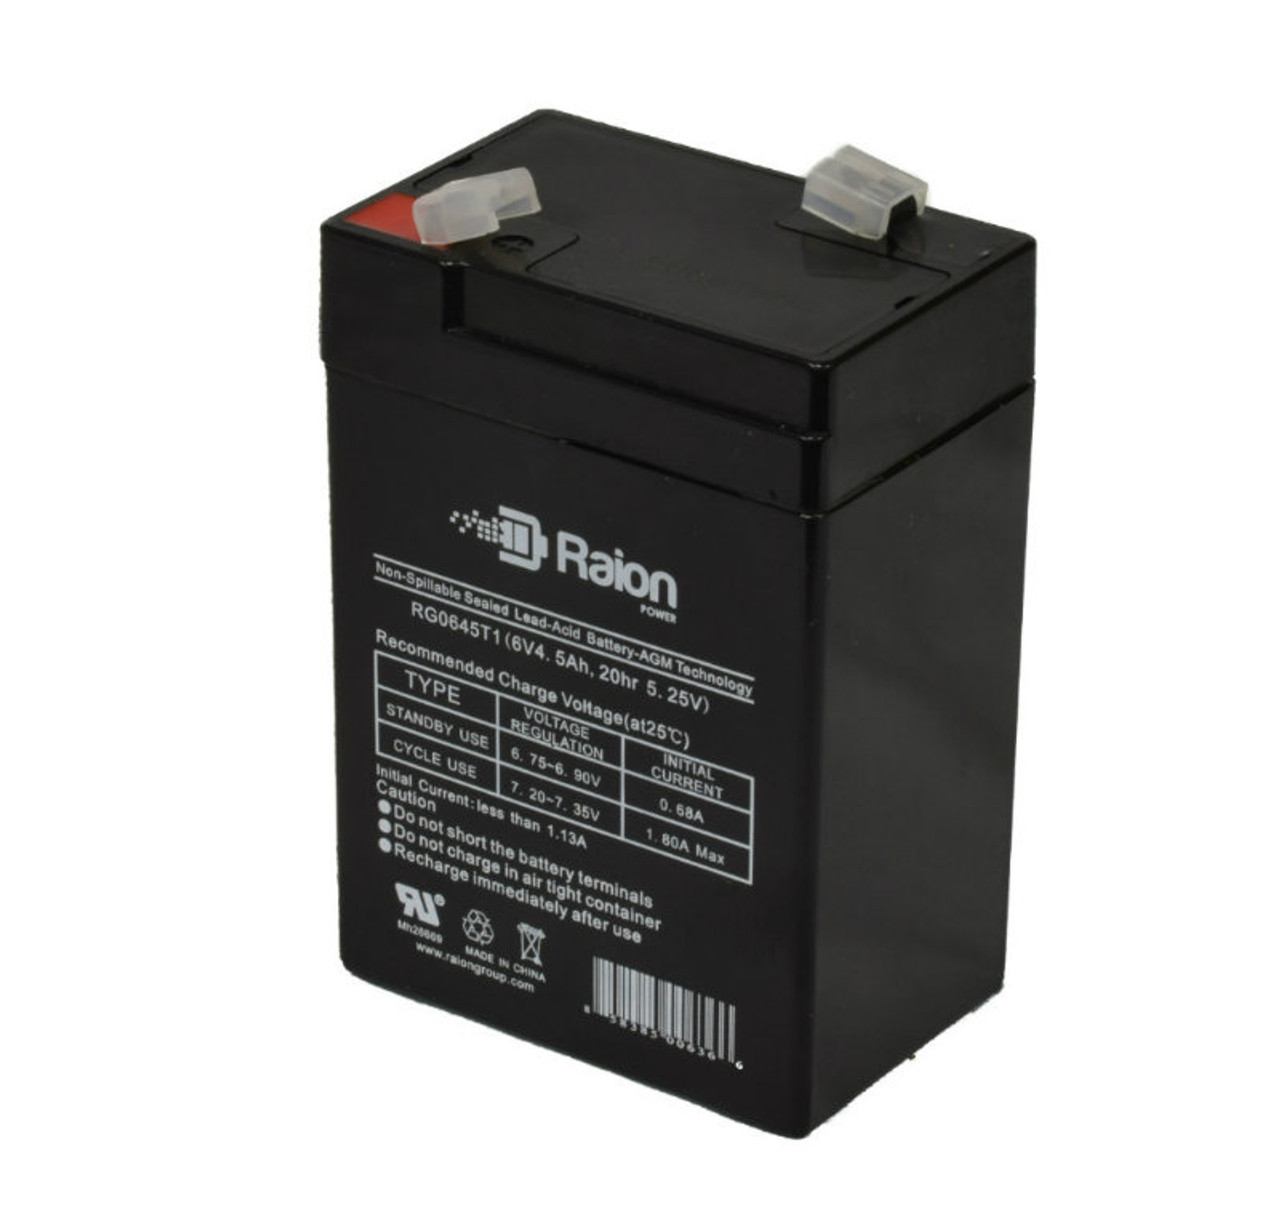 Raion Power RG0645T1 6V 4.5Ah Replacement Battery Cartridge for Silent Knight 5207